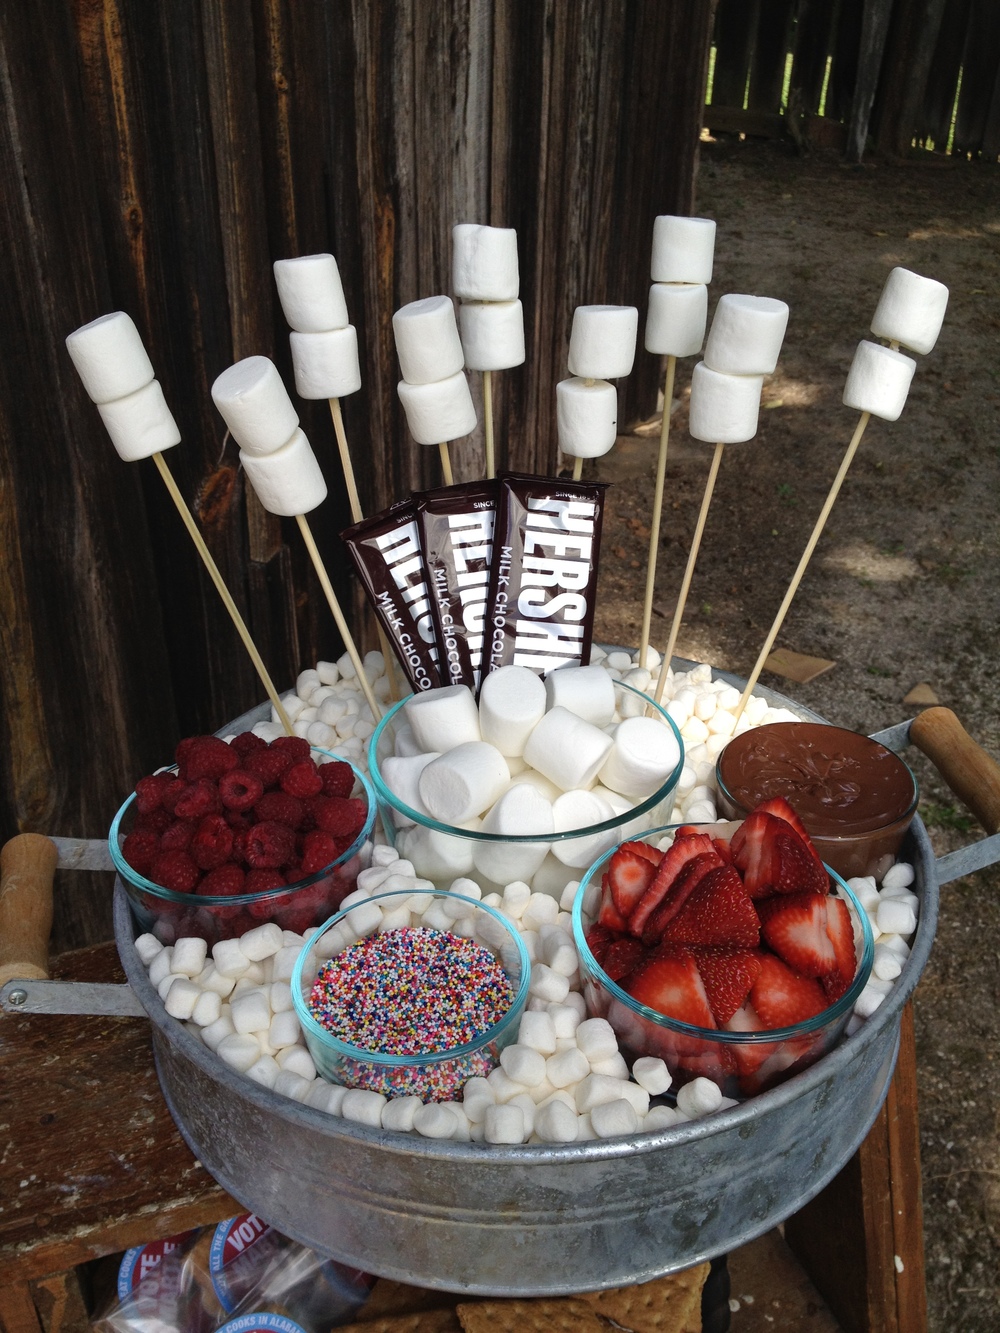 Make a S'mores bar for your weekend get-togethers!